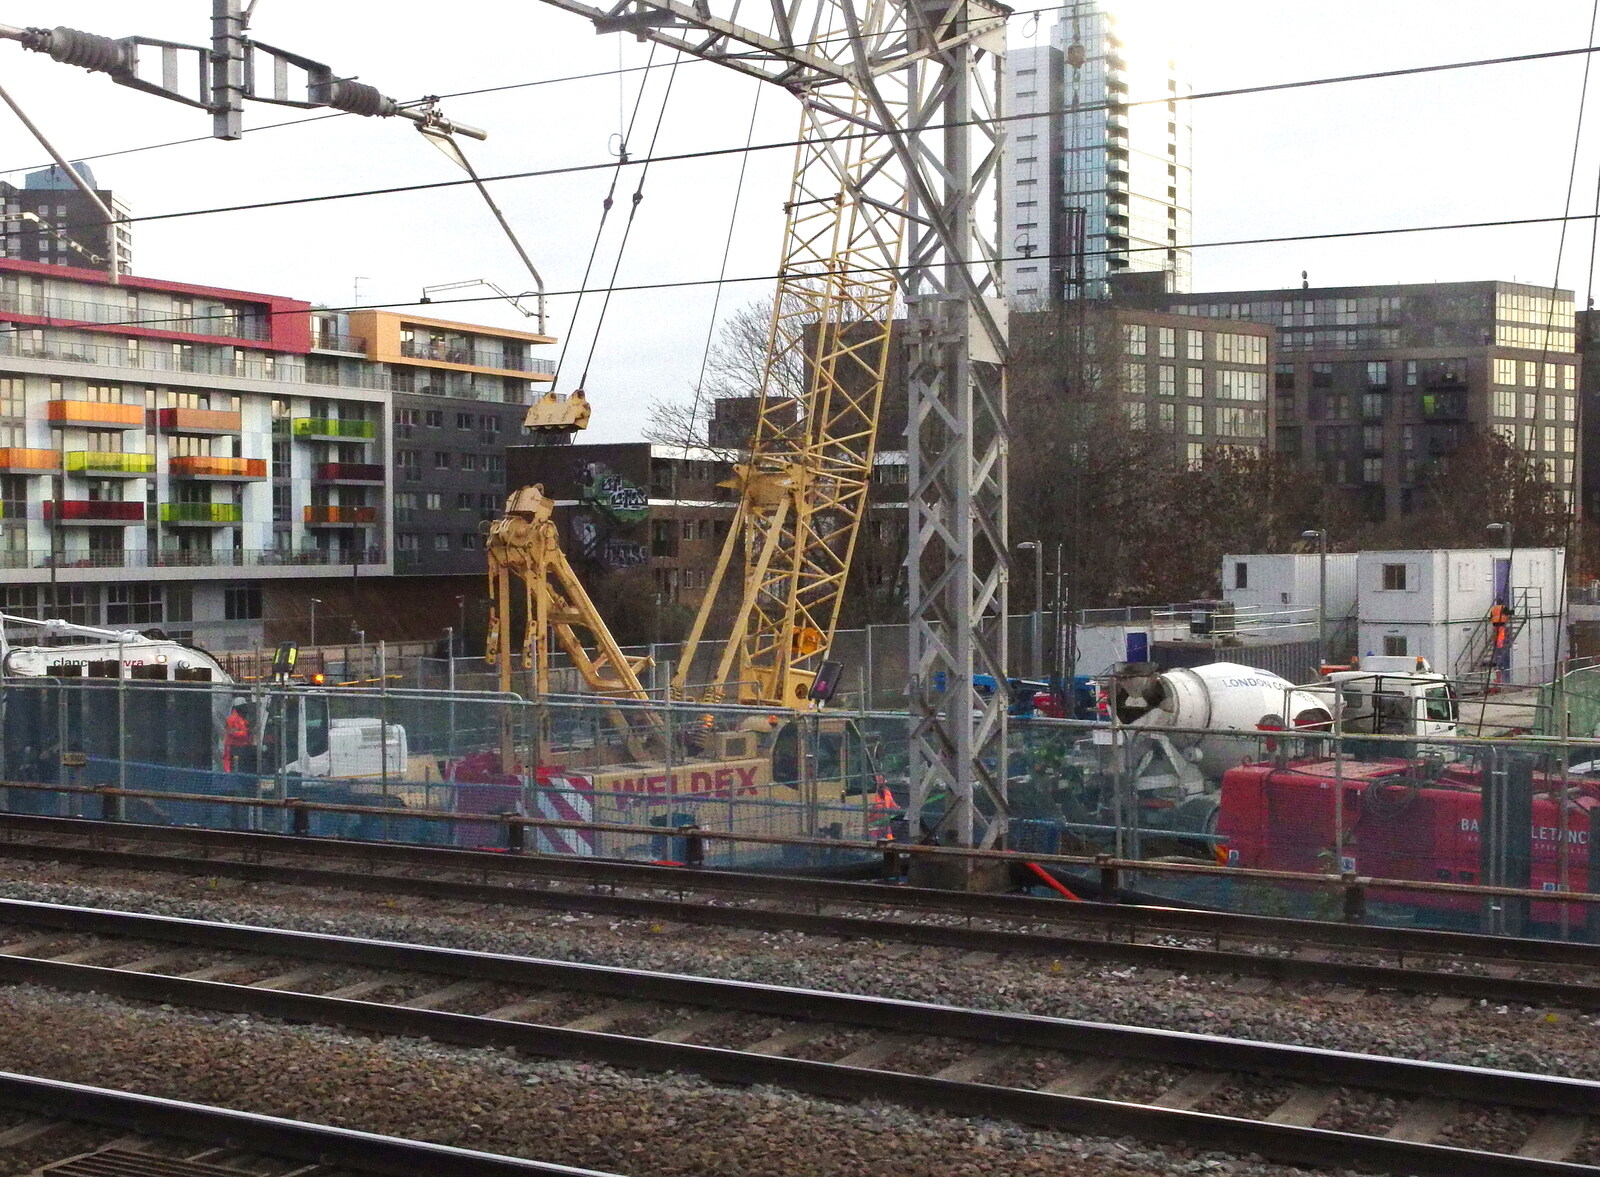 SwiftKey's Arcade Cabinet, and the Streets of Southwark, London - 5th December 2013: Overspill from the Crossrail dig